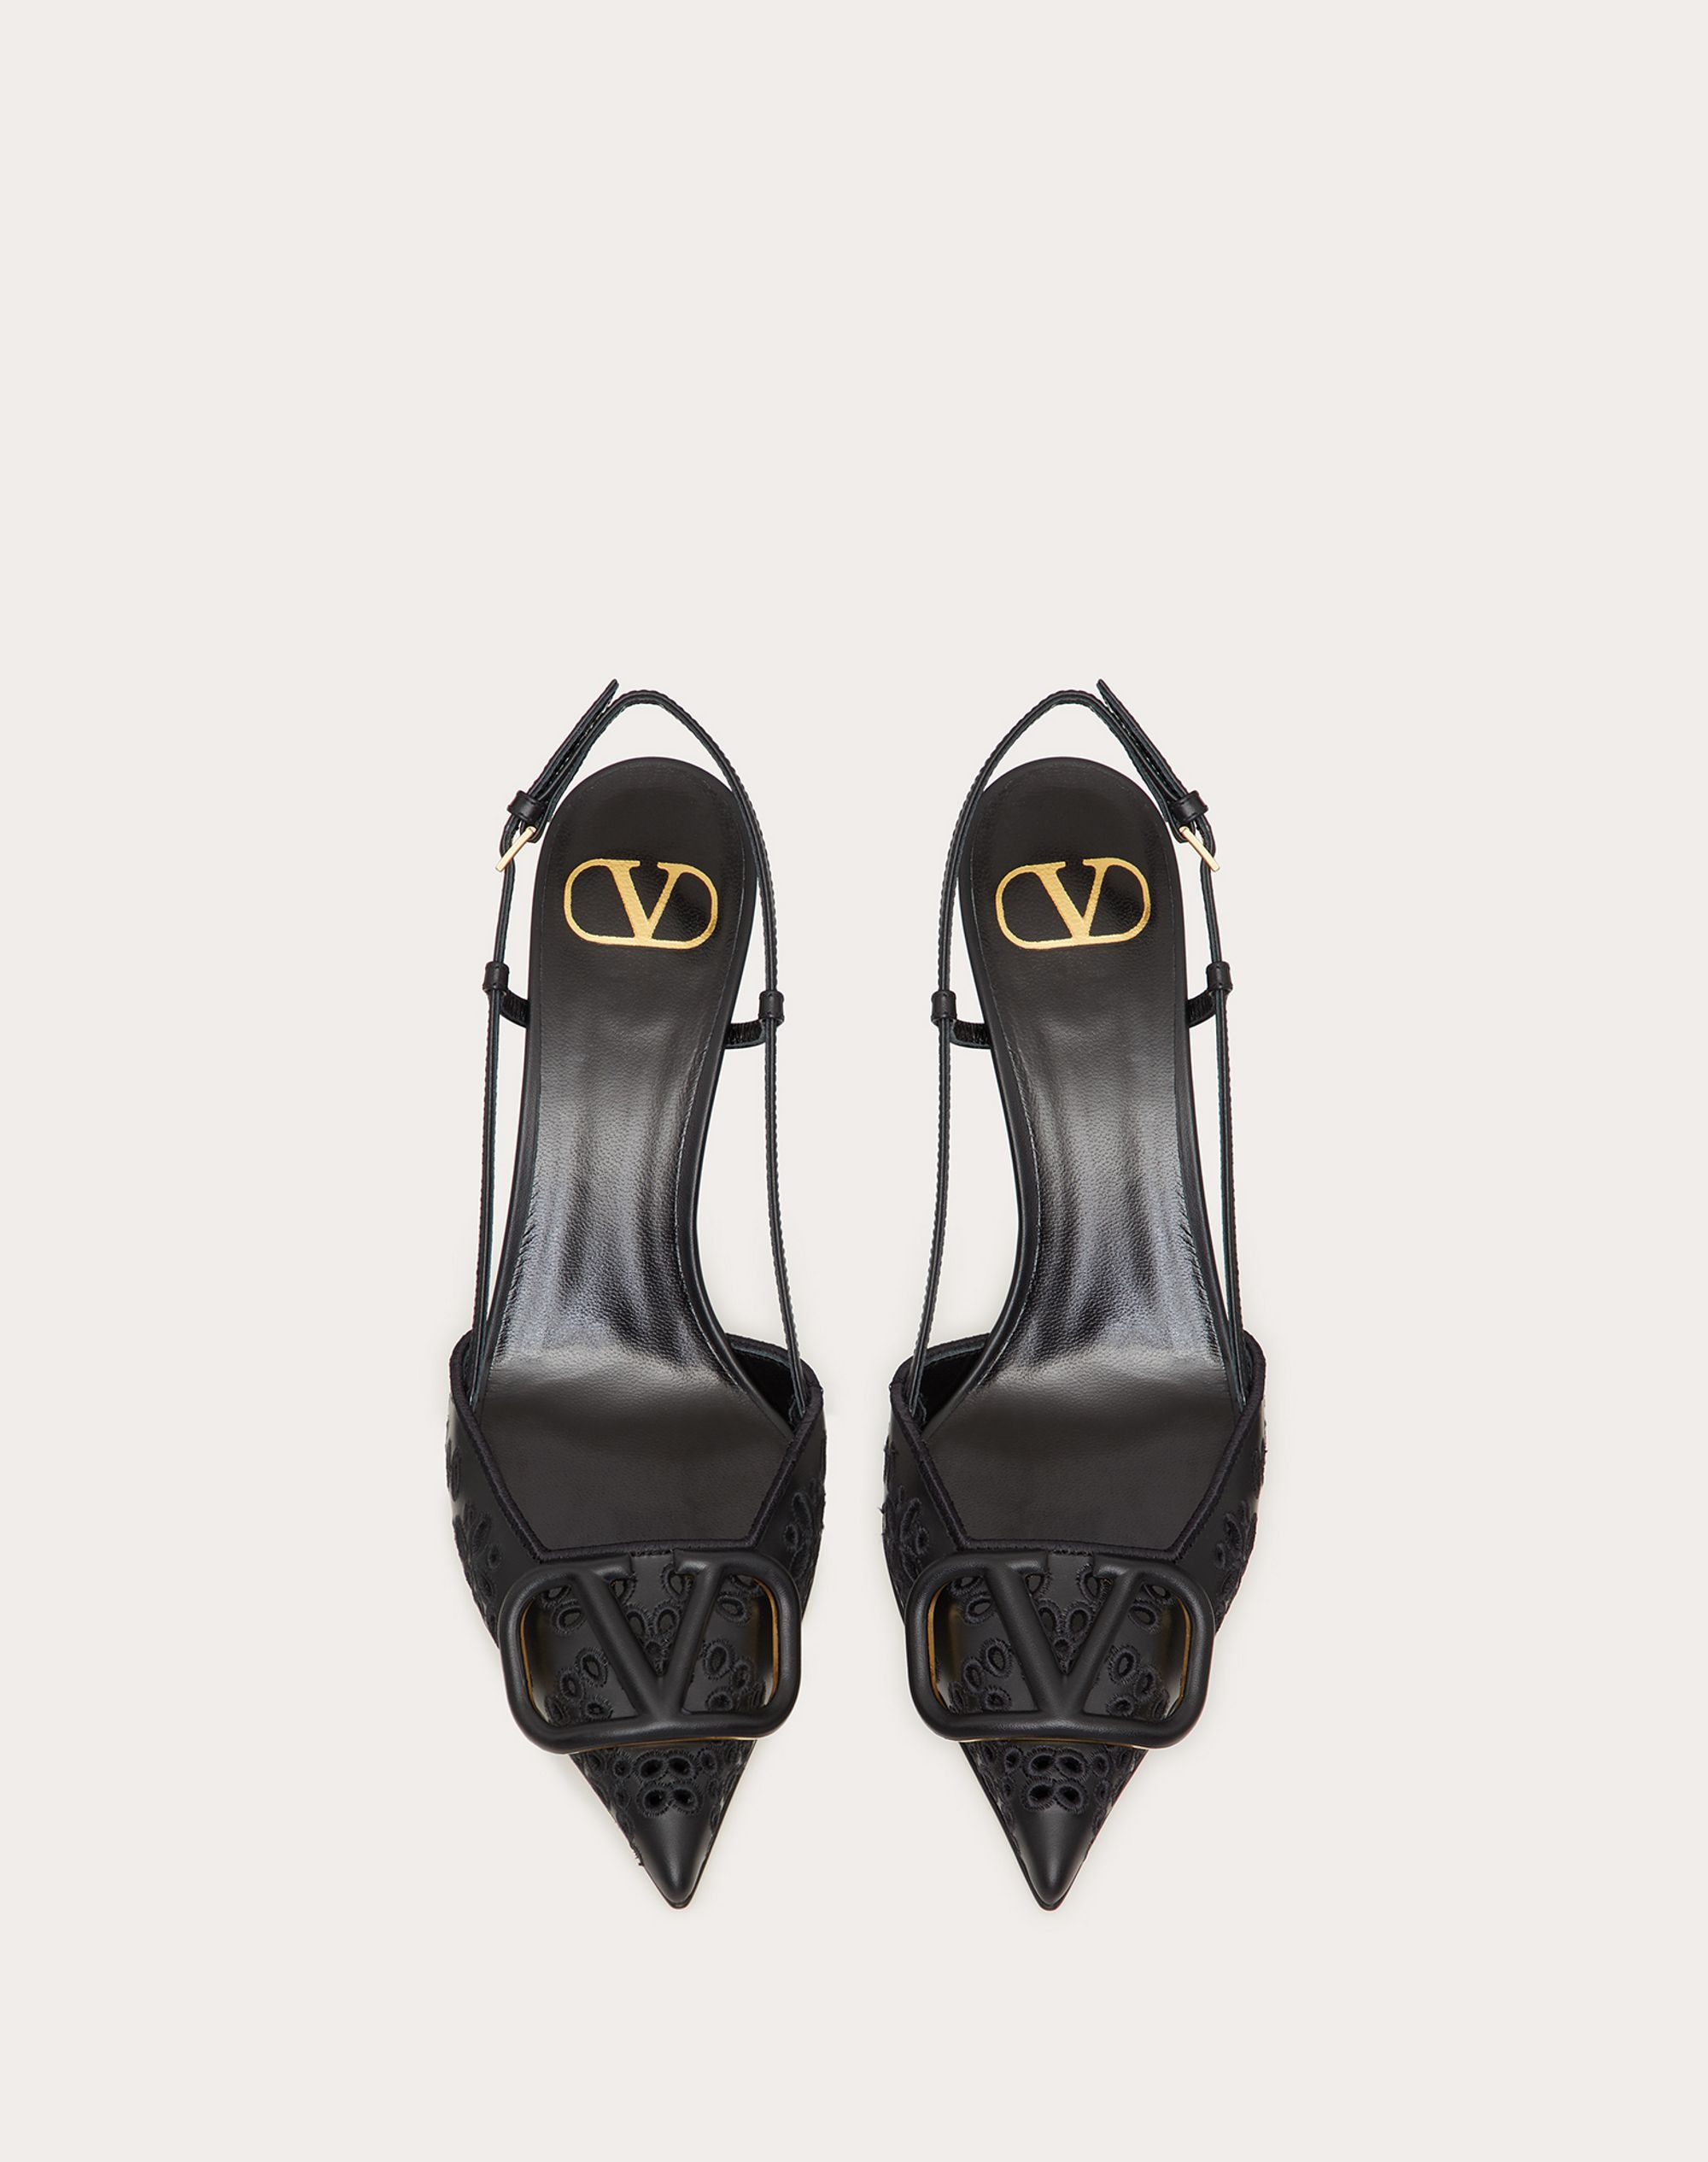 VLOGO SIGNATURE CALFSKIN SLINGBACK PUMP WITH SAN GALLO EMBROIDERY 80 MM - 4